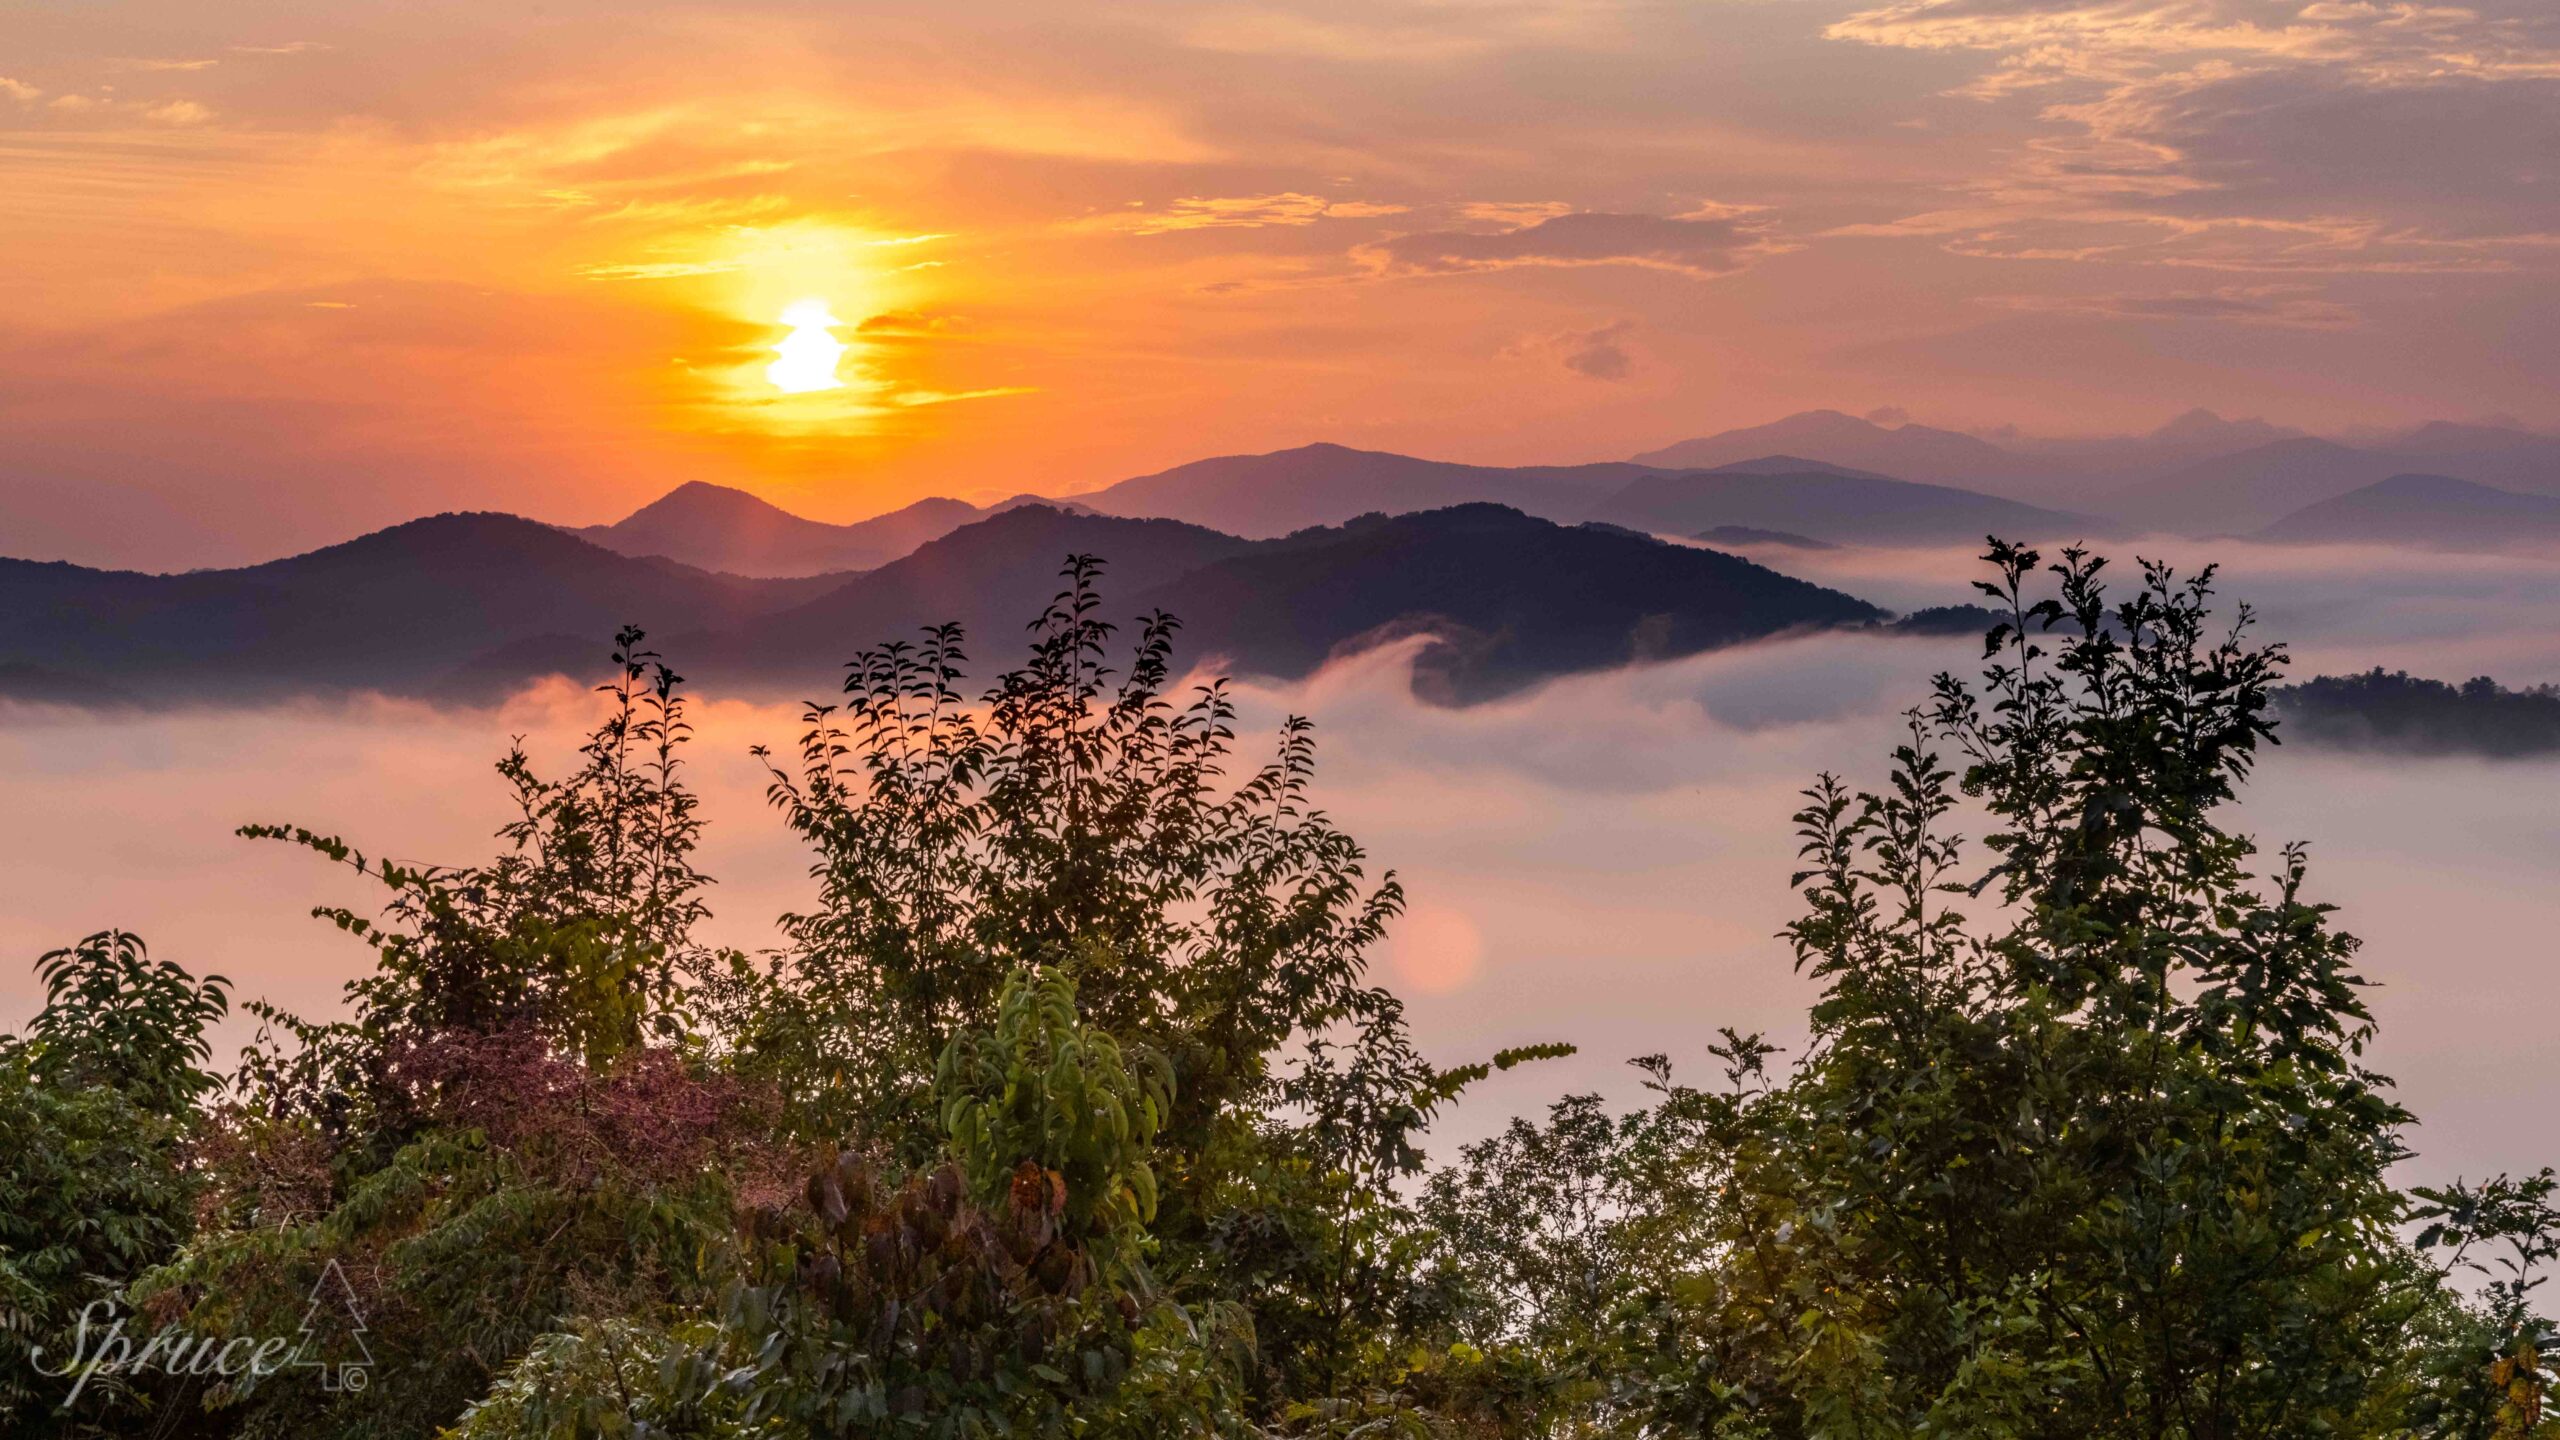 Sun rising over Smoky Mountains with fog filling the valleys.